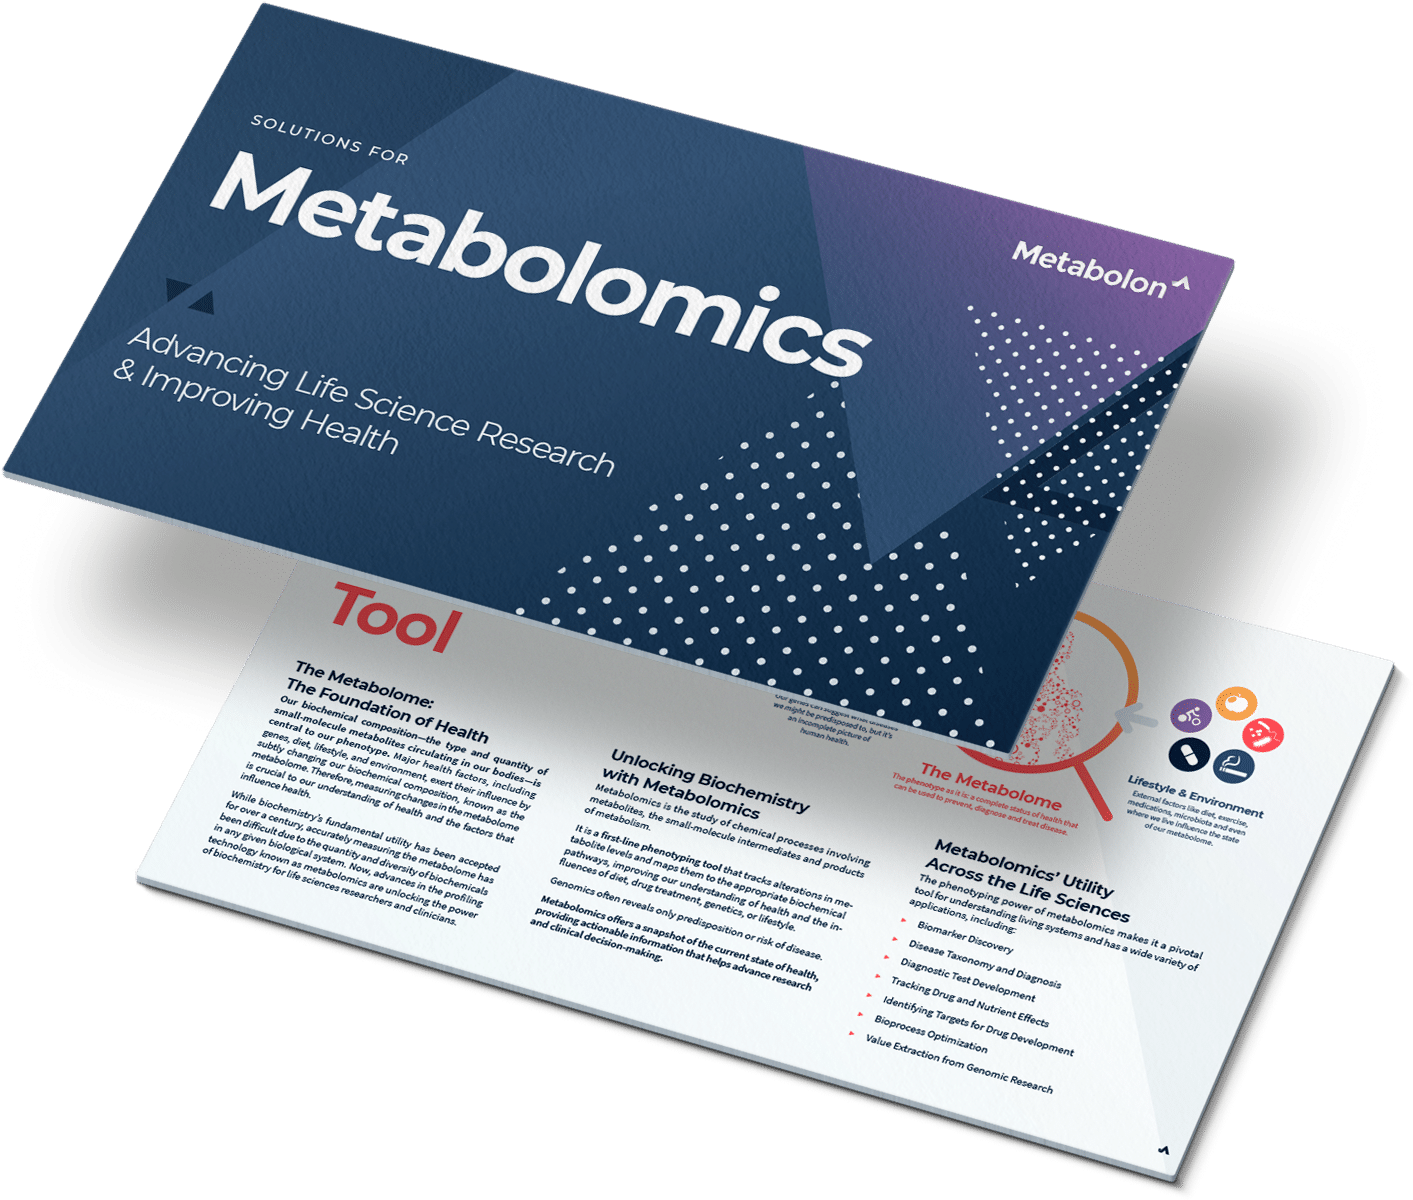 metabolomics advancing life science research